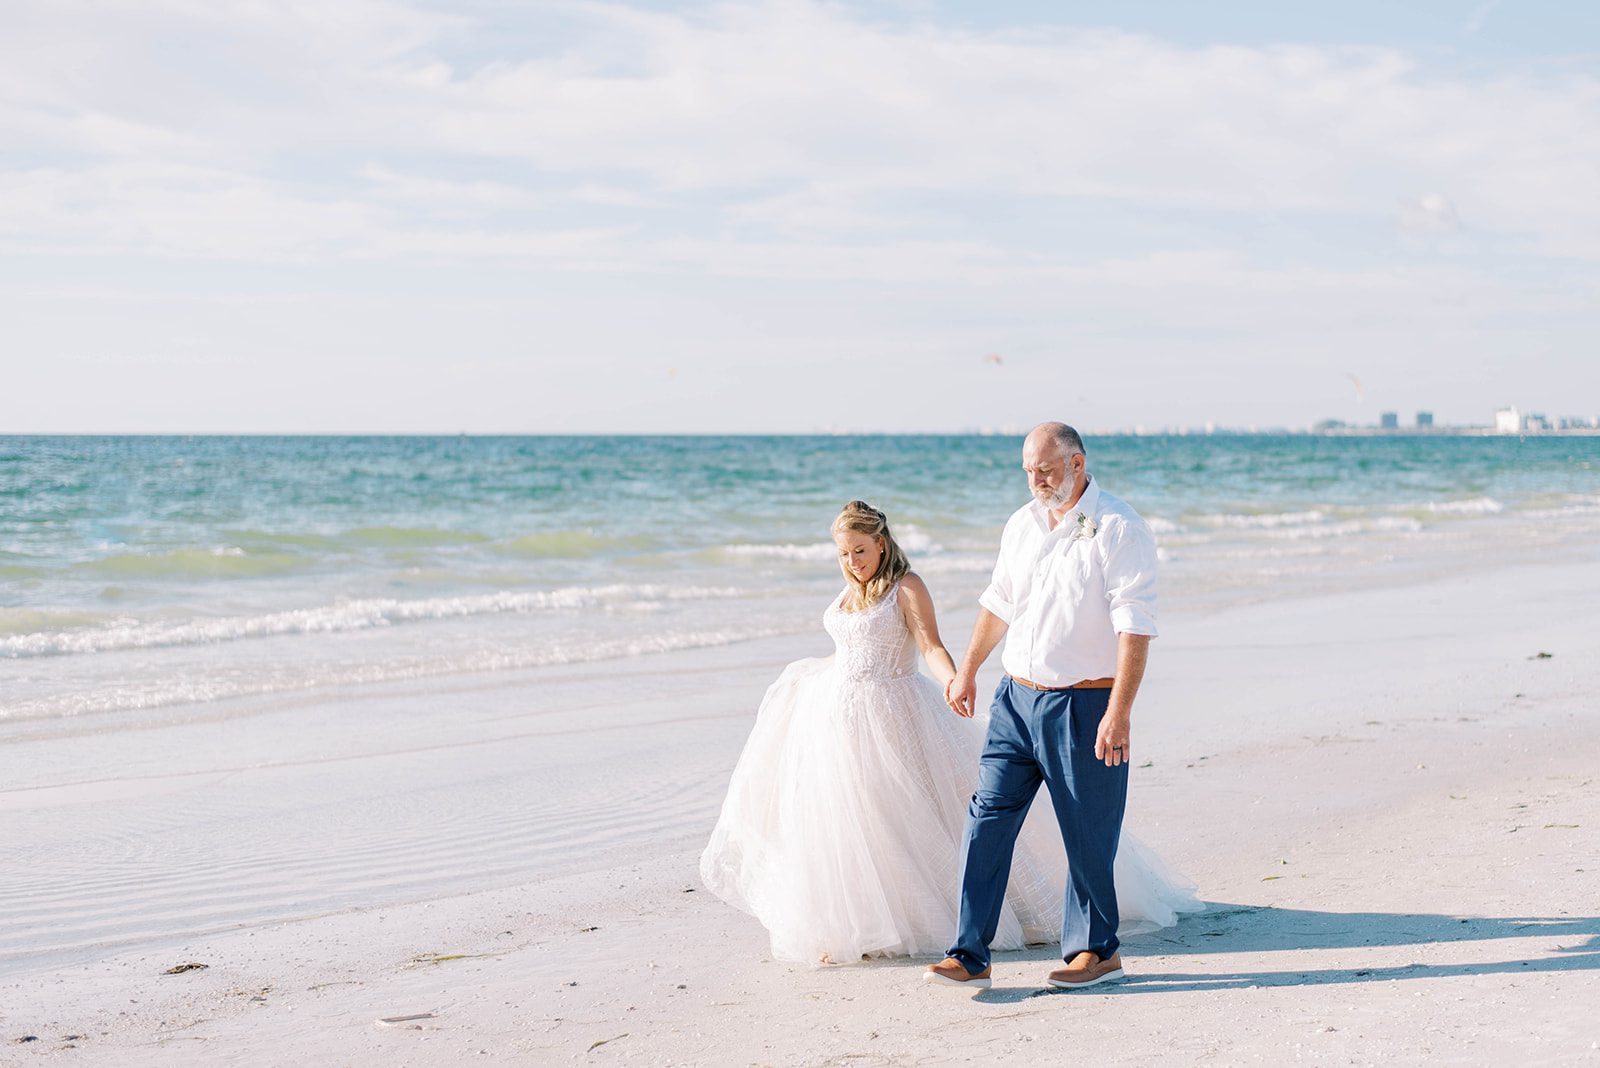 bride and groom at St. Petersburg beach holding hands while they walk together on their wedding day